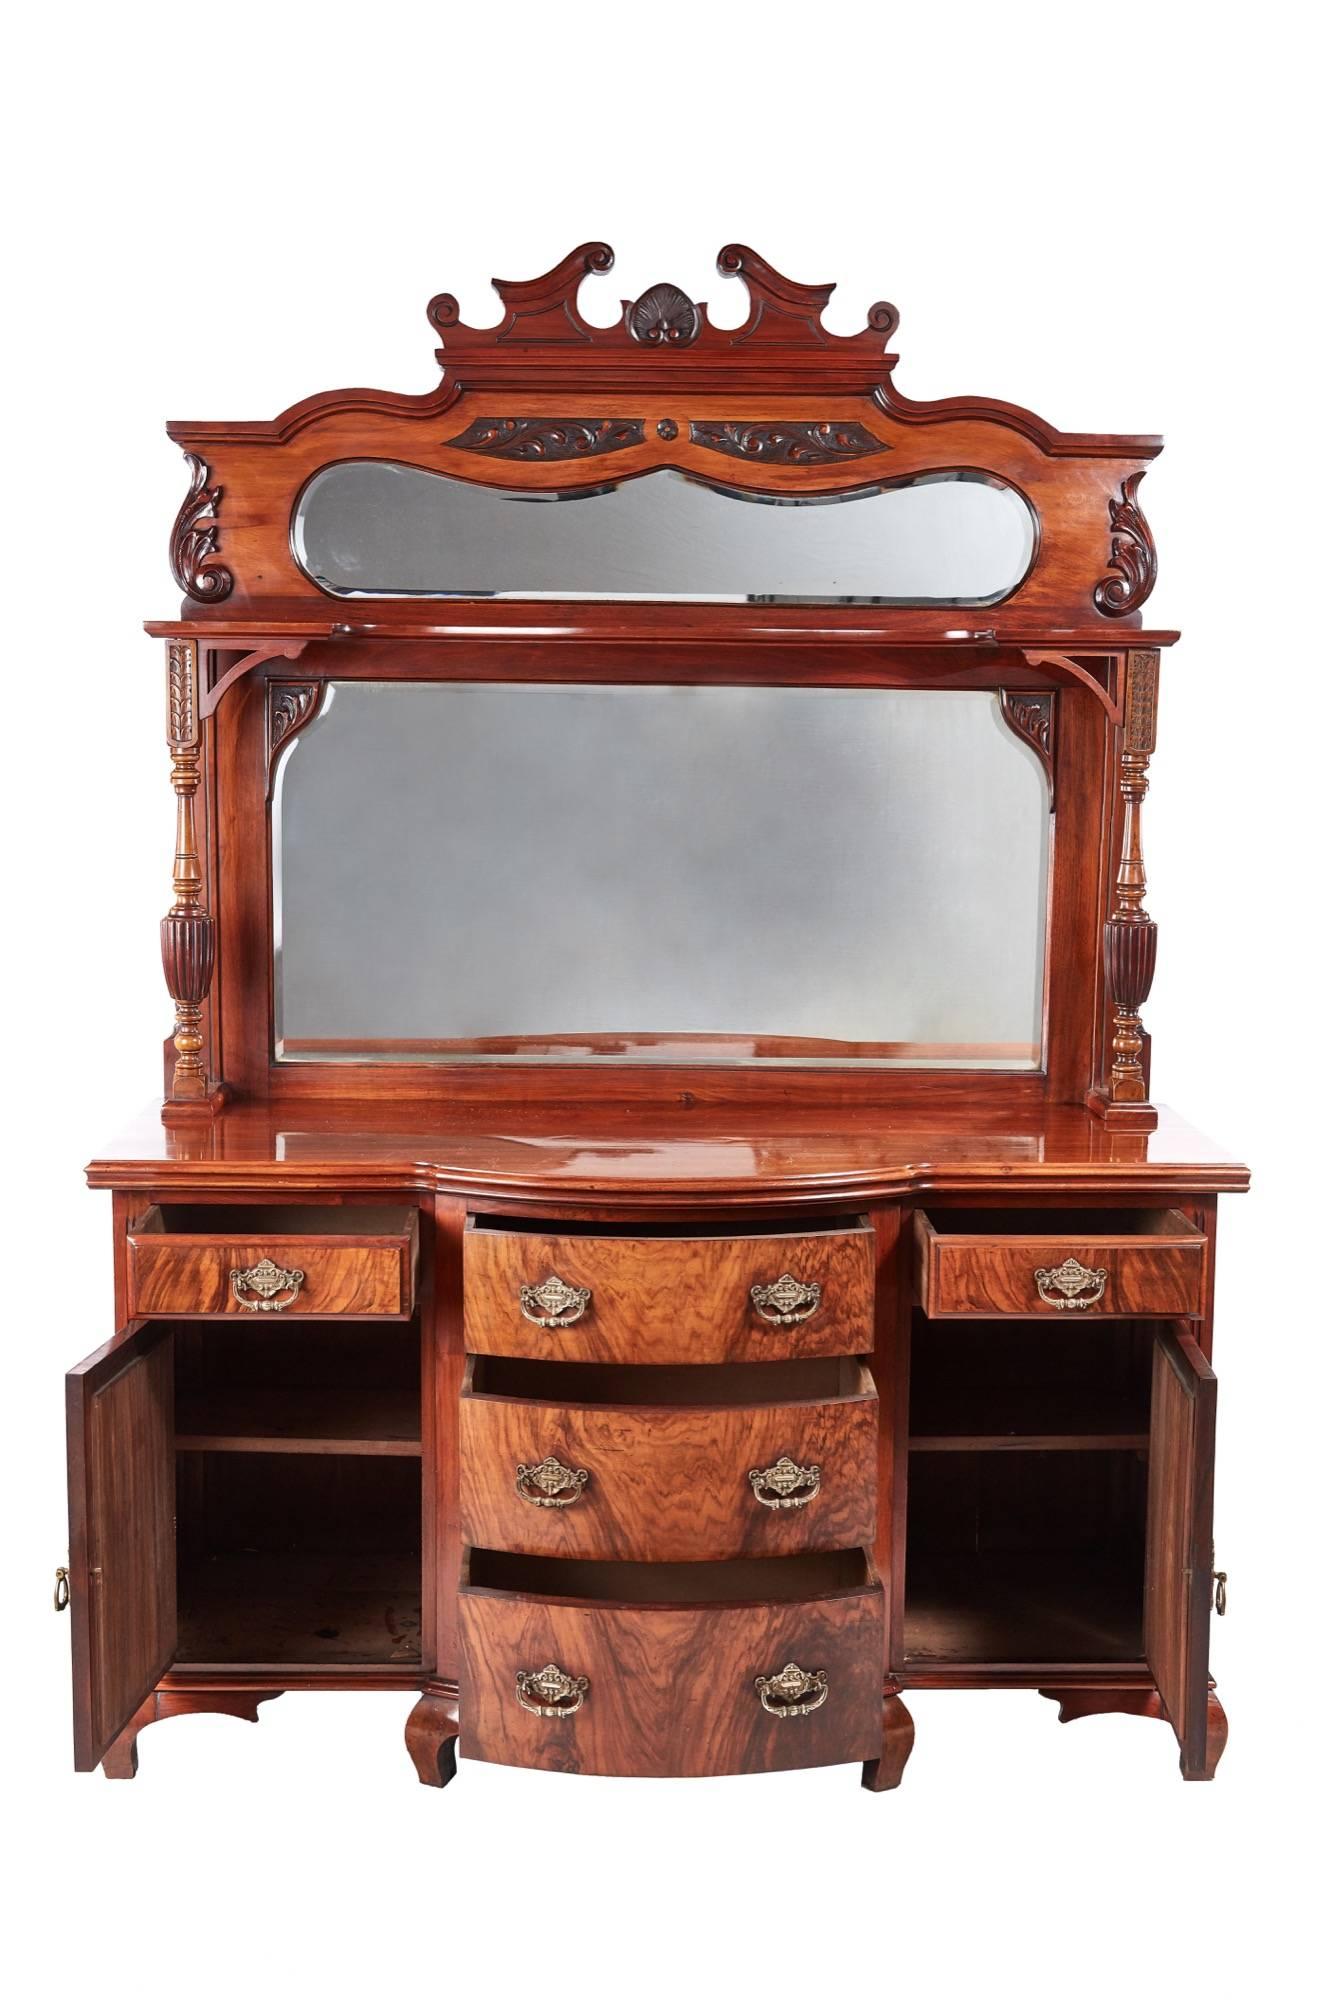 Fantastic quality antique Victorian carved walnut sideboard, with a carved walnut swan-neck pediment, two lovely shaped bevelled edge mirrors, nice carved and reeded columns supporting a shaped shelf, the base with a shaped walnut top, five lovely